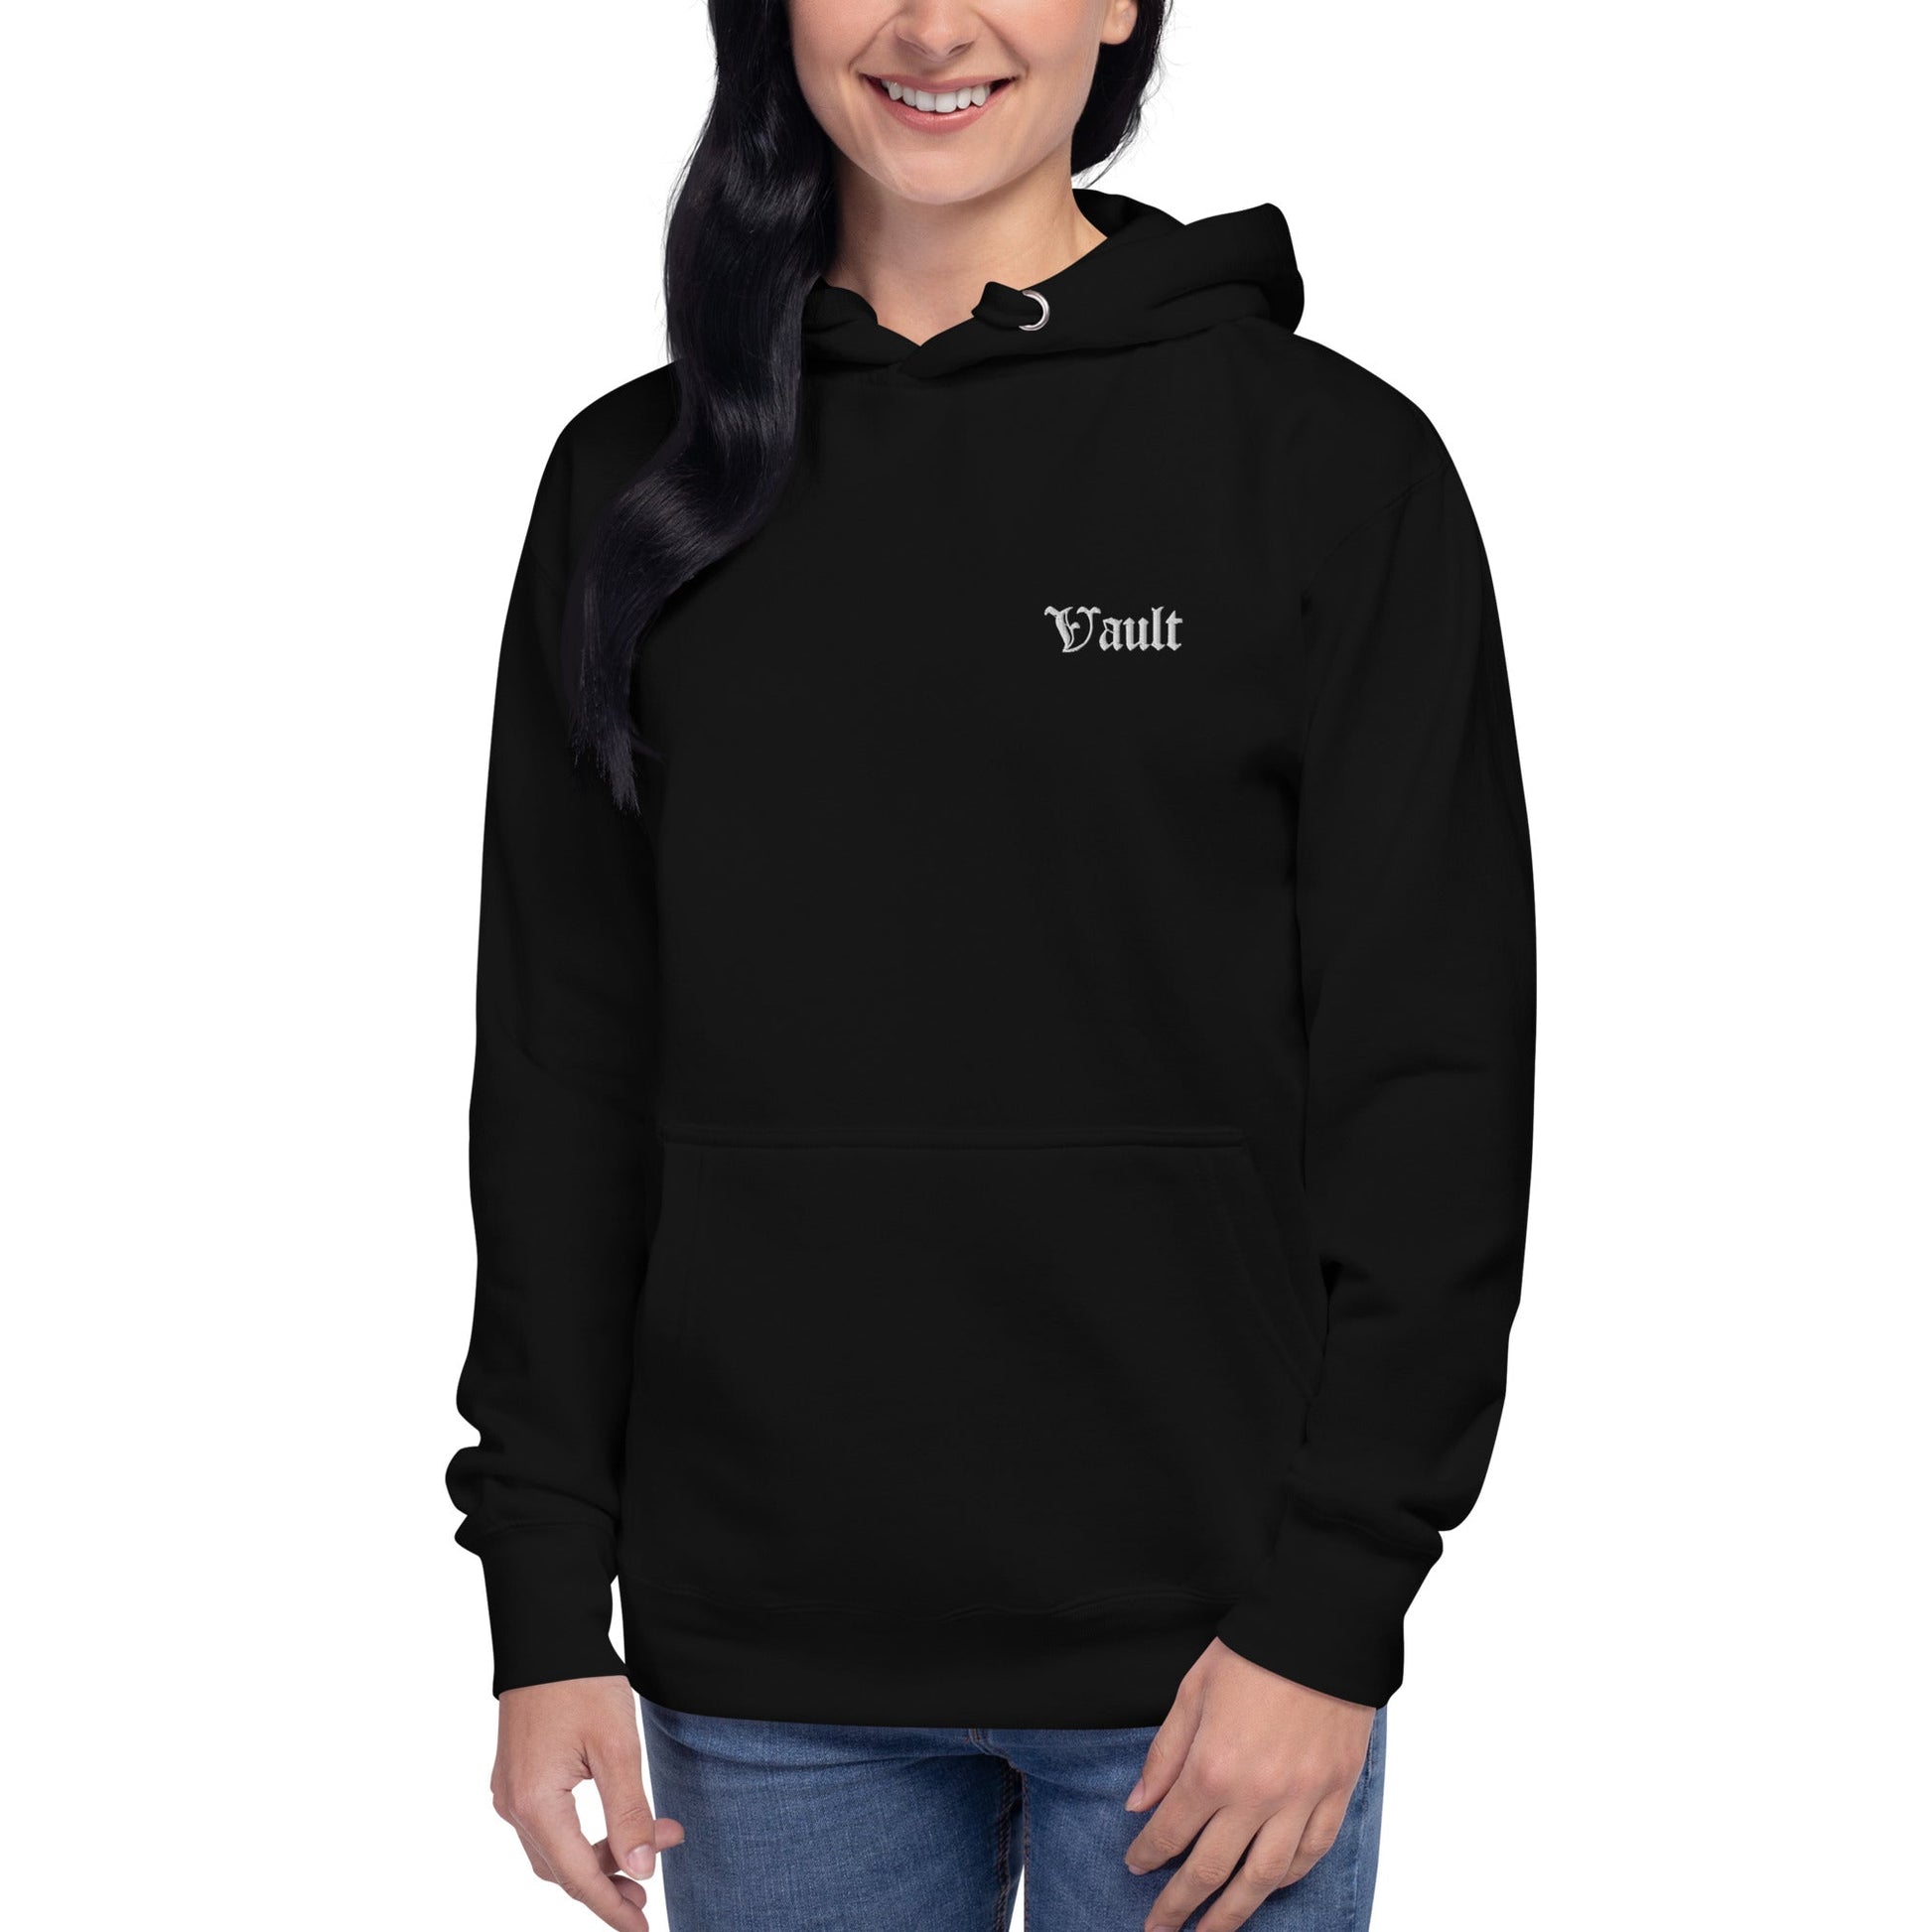 Vault Women's Old E Embroidered Hoodie - Multiple Colors - Vault Board Shop Vault Board Shop